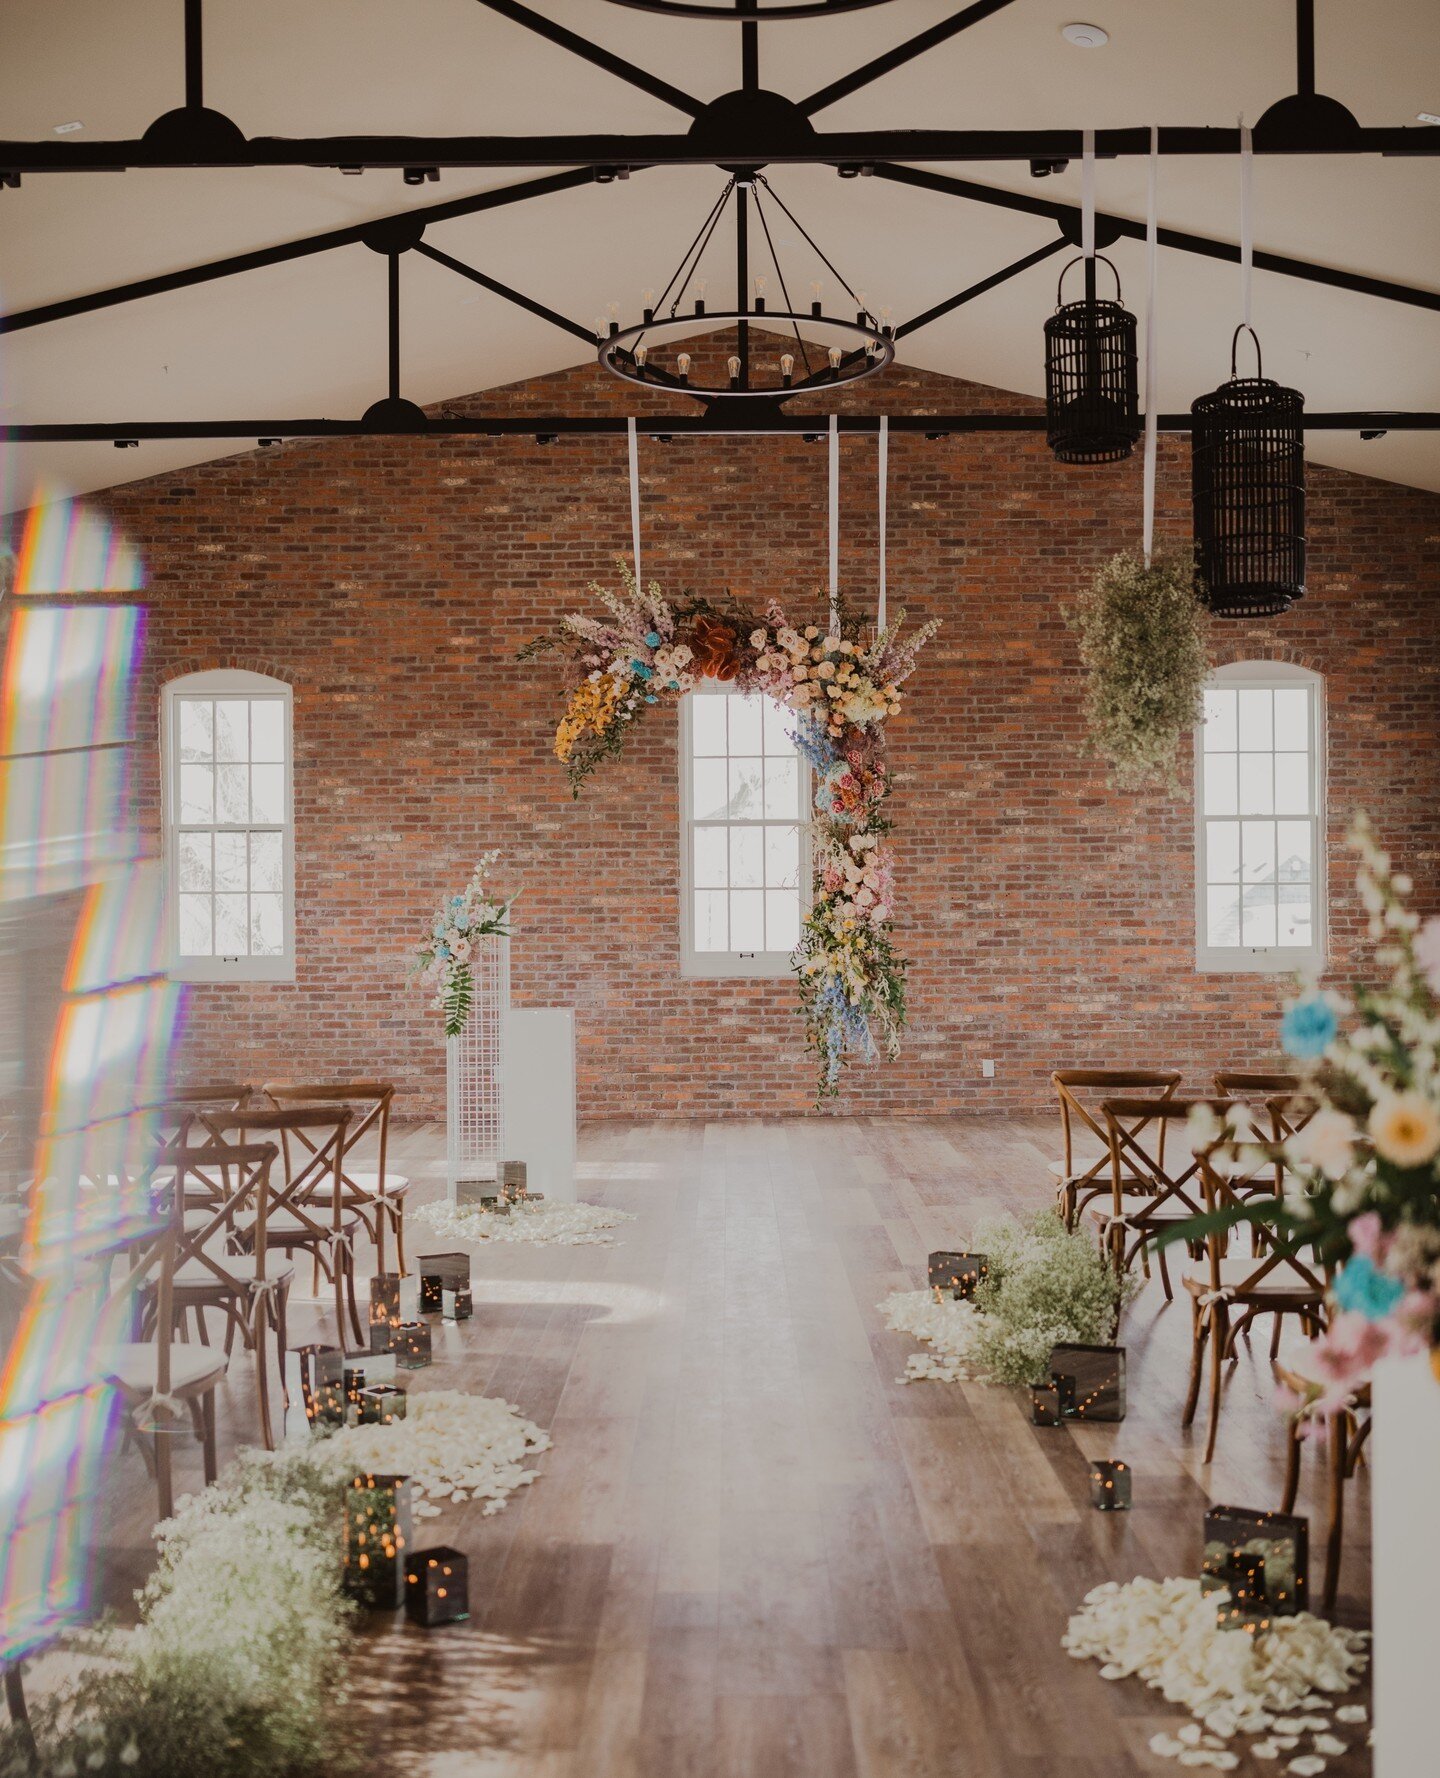 Our space is a blank canvas for you! Bring in as much or as little d&eacute;cor as you see fit!⁠
⁠
#luxurywedding #weddingwire #modernbride #married #weddingfashion #brides #bride #realwedding #weddingphotography #weddingday #destinationwedding #wedd